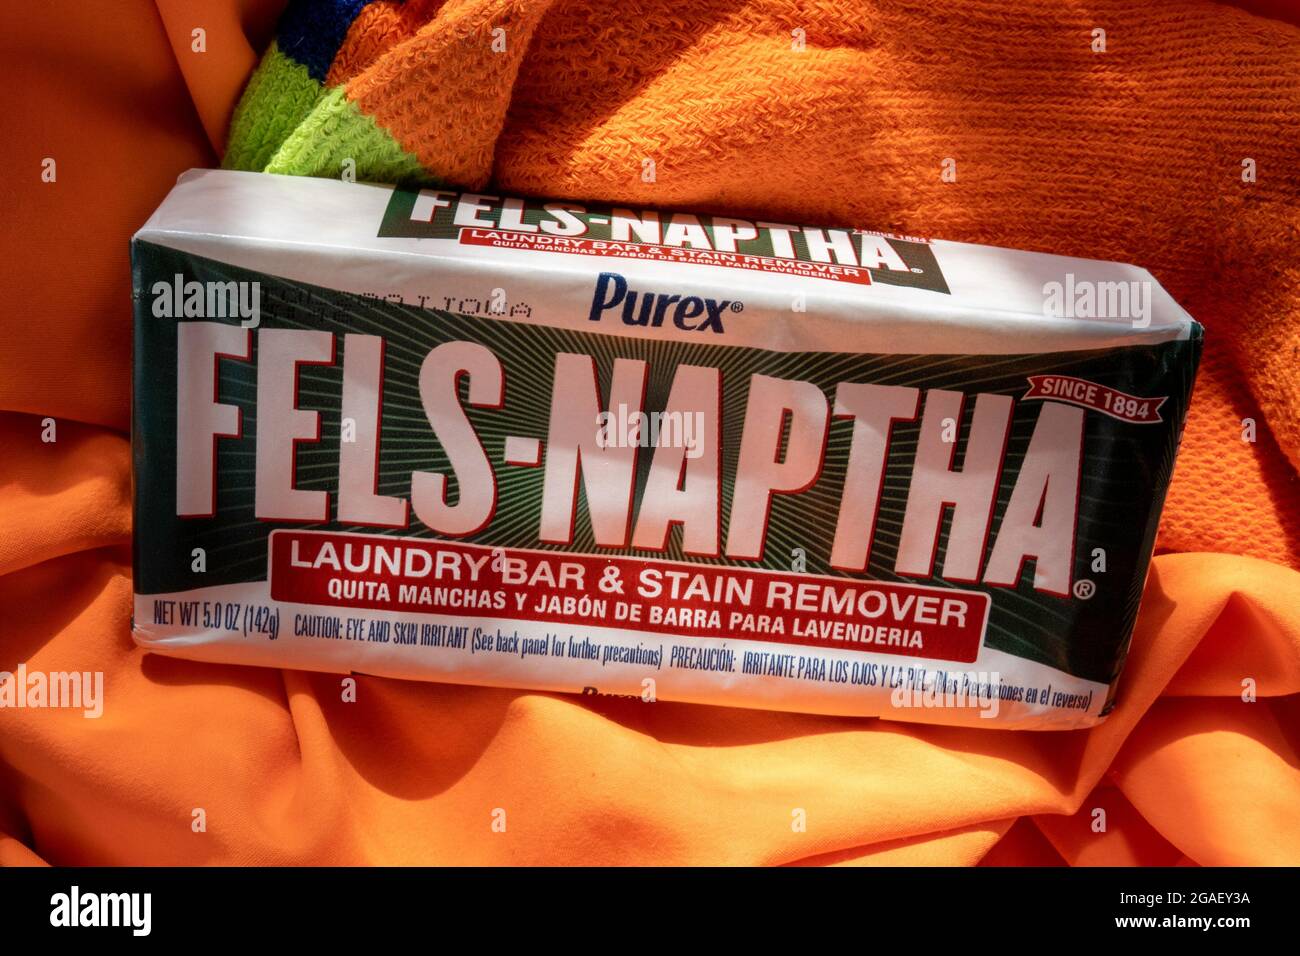 Fels-naptha is American brand of laundry soap, USA Stock Photo